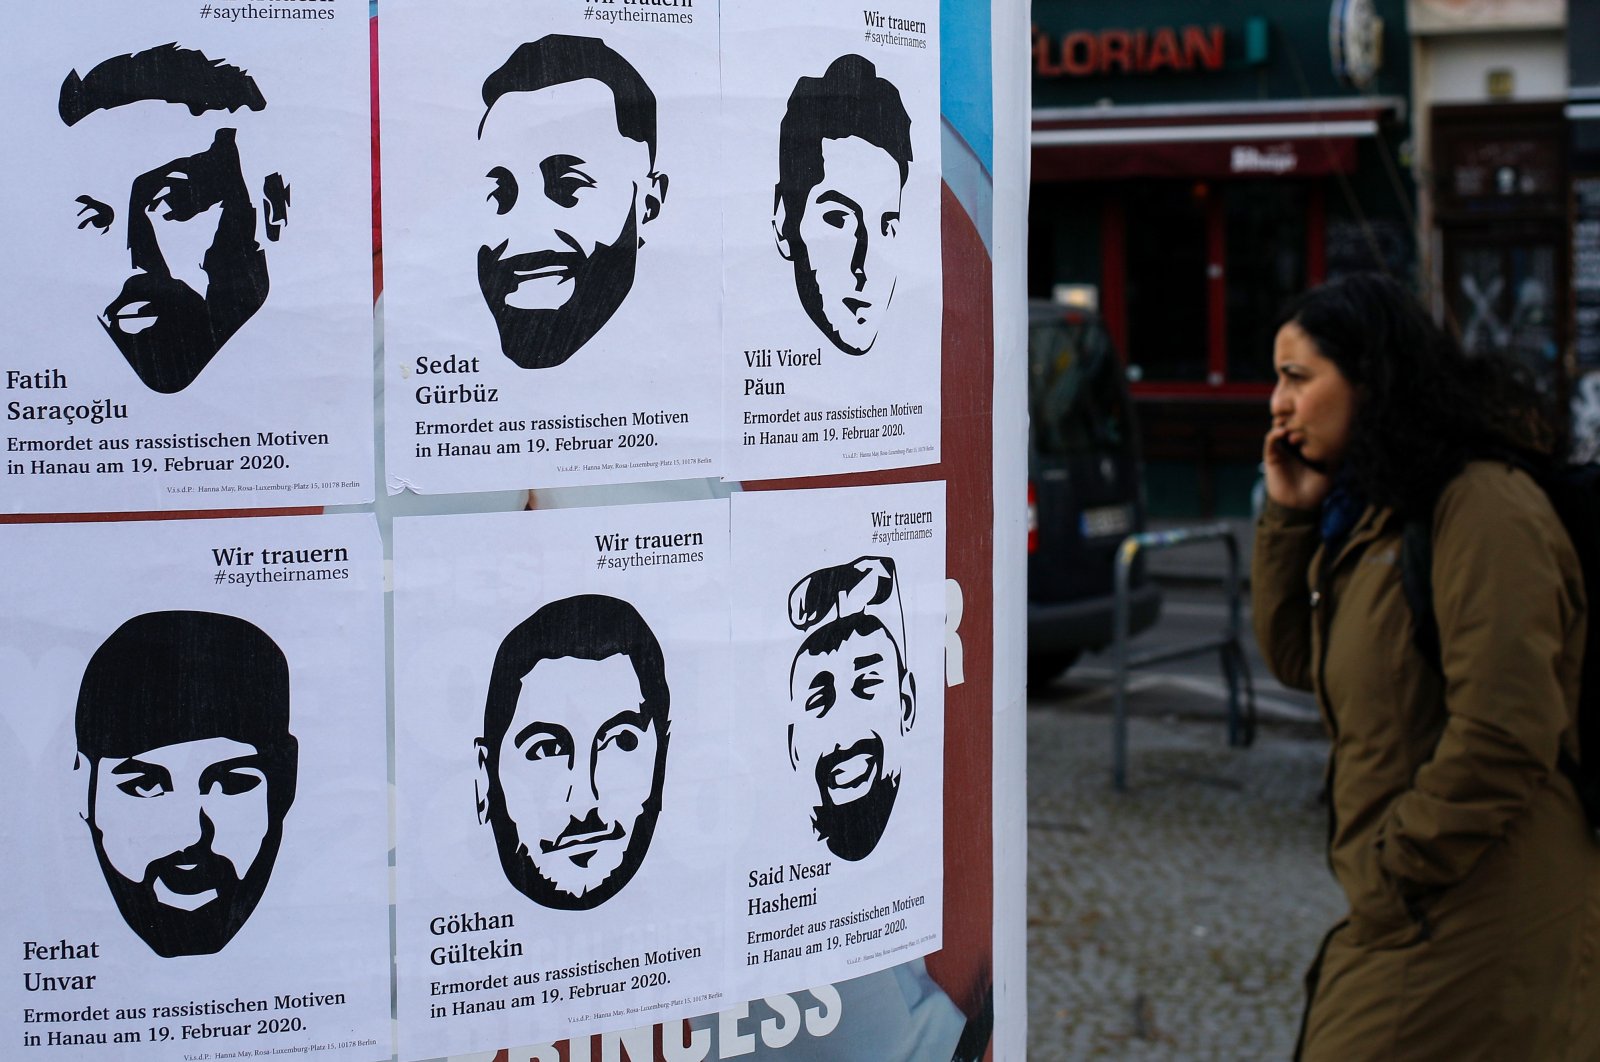 Posters with the pictures and names of victims of a far-right extremist gunman who killed nine people in a racist attack in Hanau, Germany on Feb. 19 can be seen on an advertising column in Berlin's Kreuzberg district, Germany, March 19, 2020. (AFP Photo)